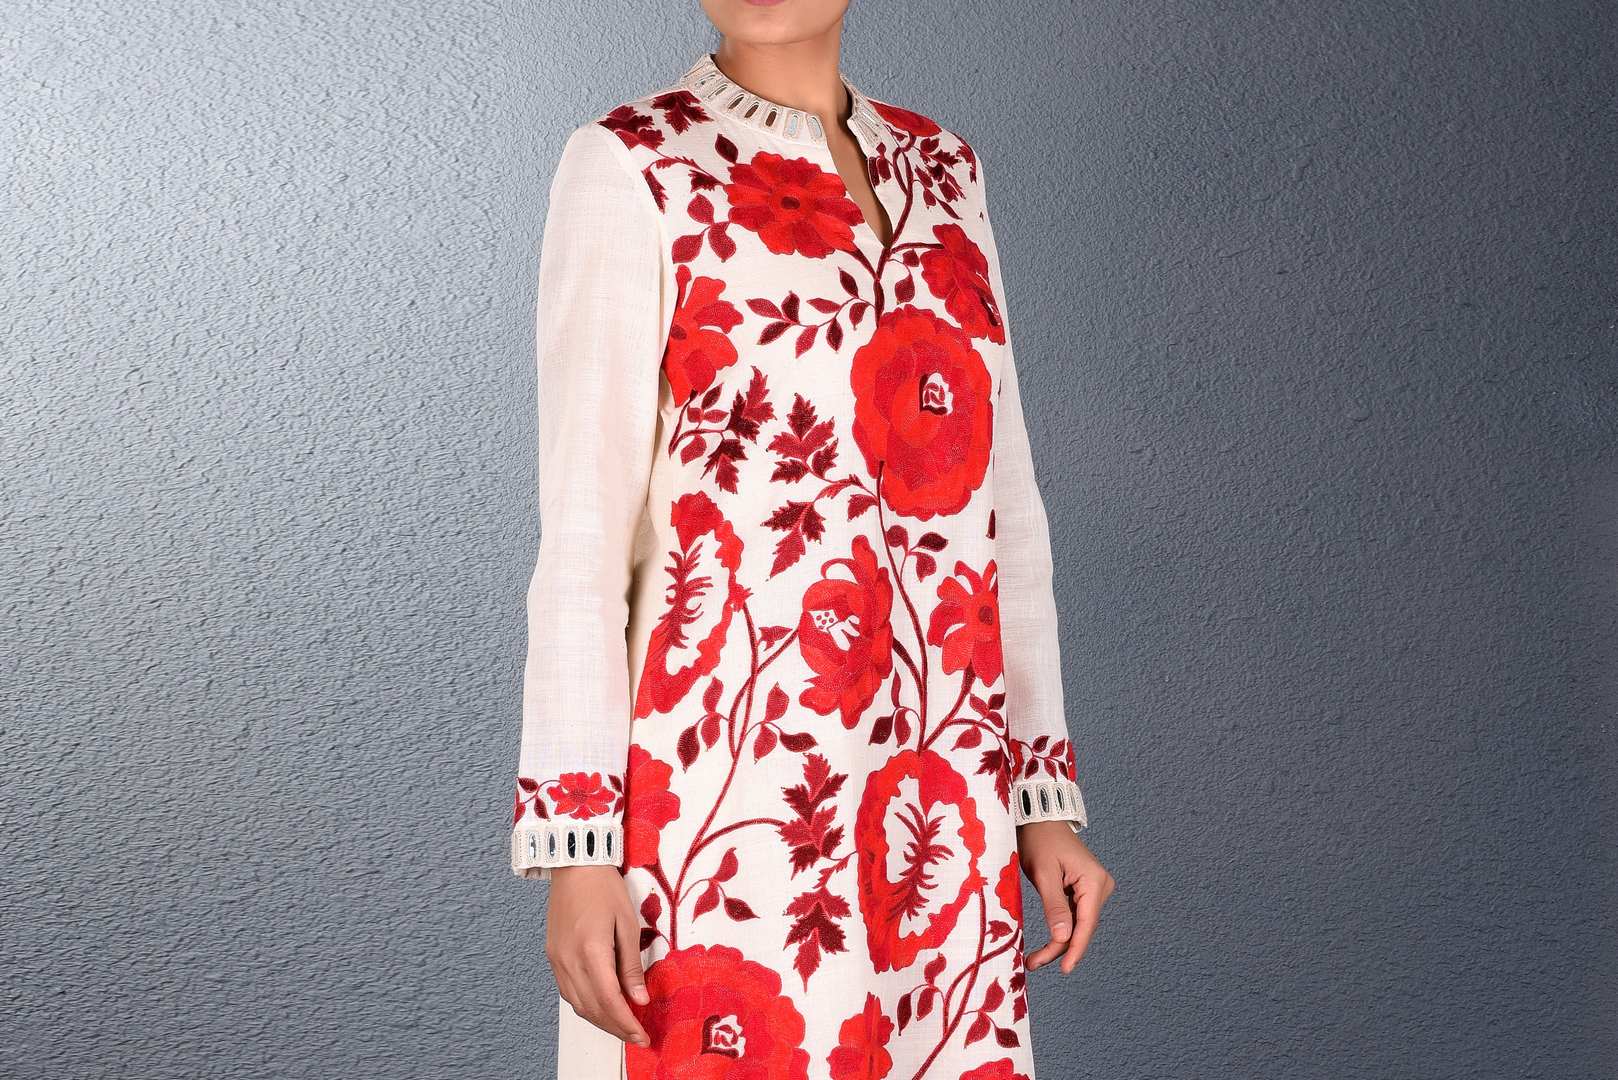 Buy off-white aari and mirror work kurta with straight pants online in USA. Pick your favorite Indian dresses from Pure Elegance clothing store in USA. Step up your style with a range of Indian designer dresses, suits, designer lehengas also available on our online store. -embroidery